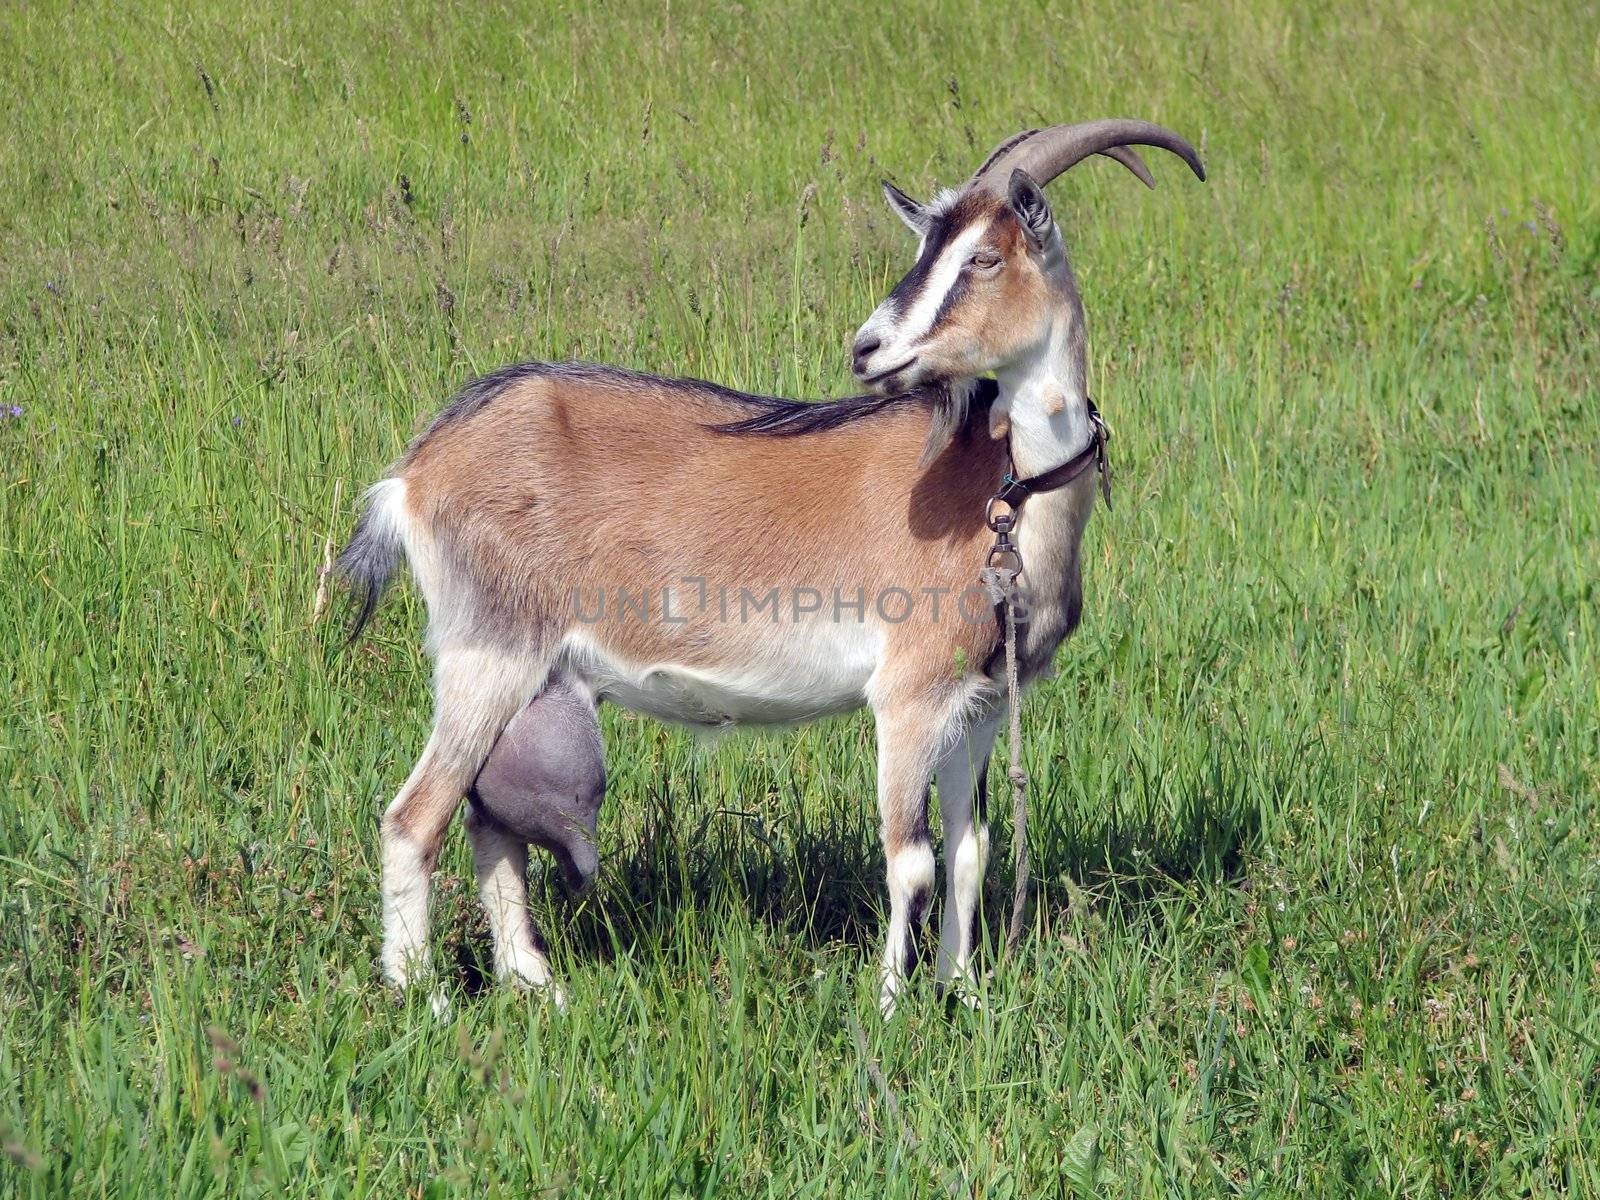 slim she-goat on a green grass